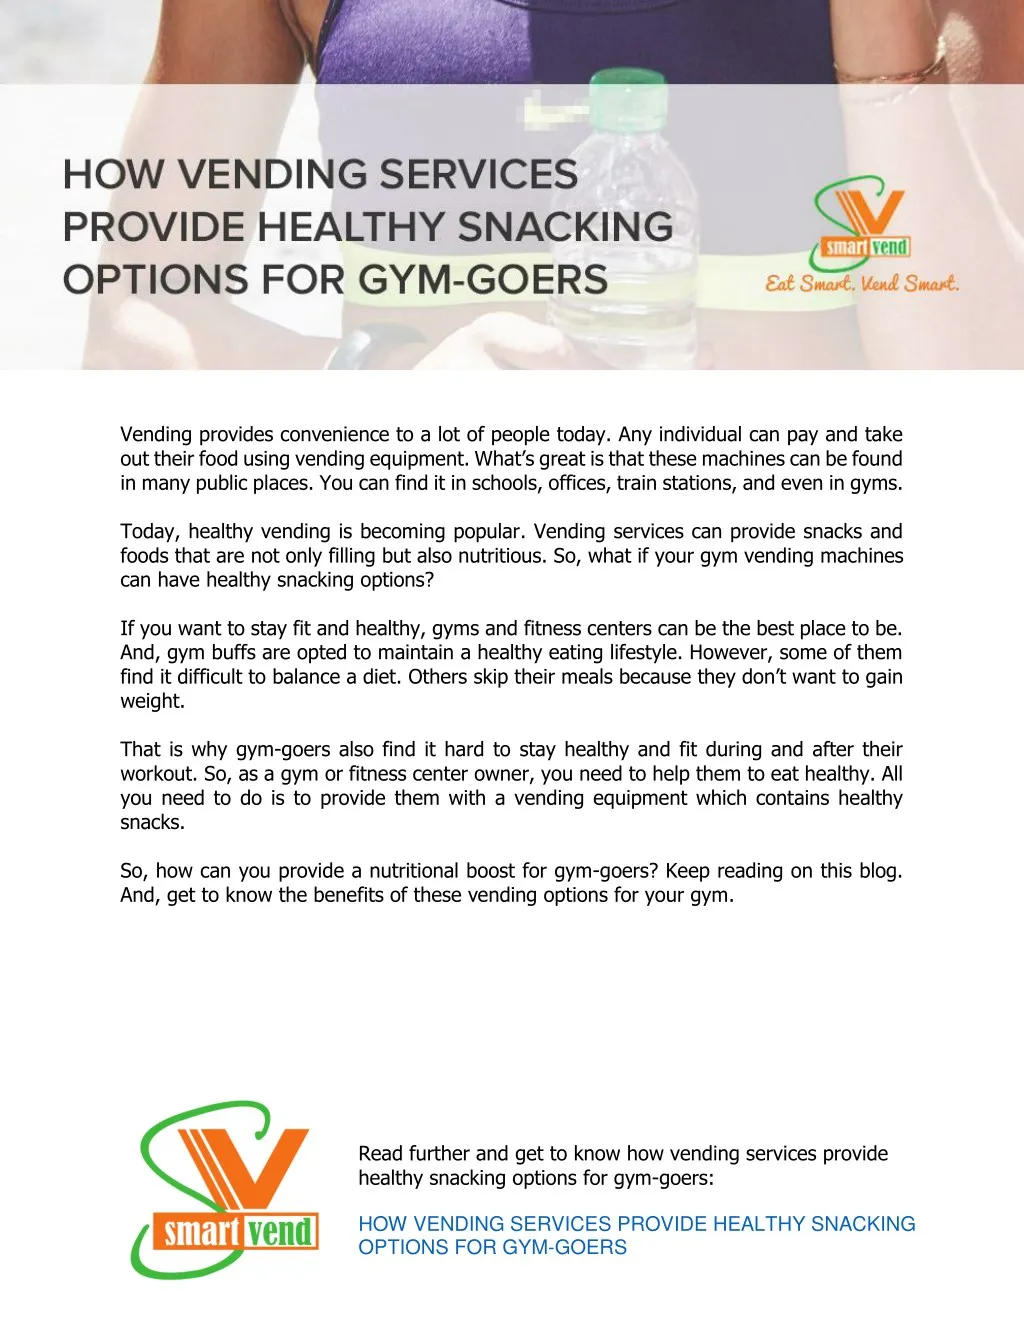 vending provides convenience to a lot of people